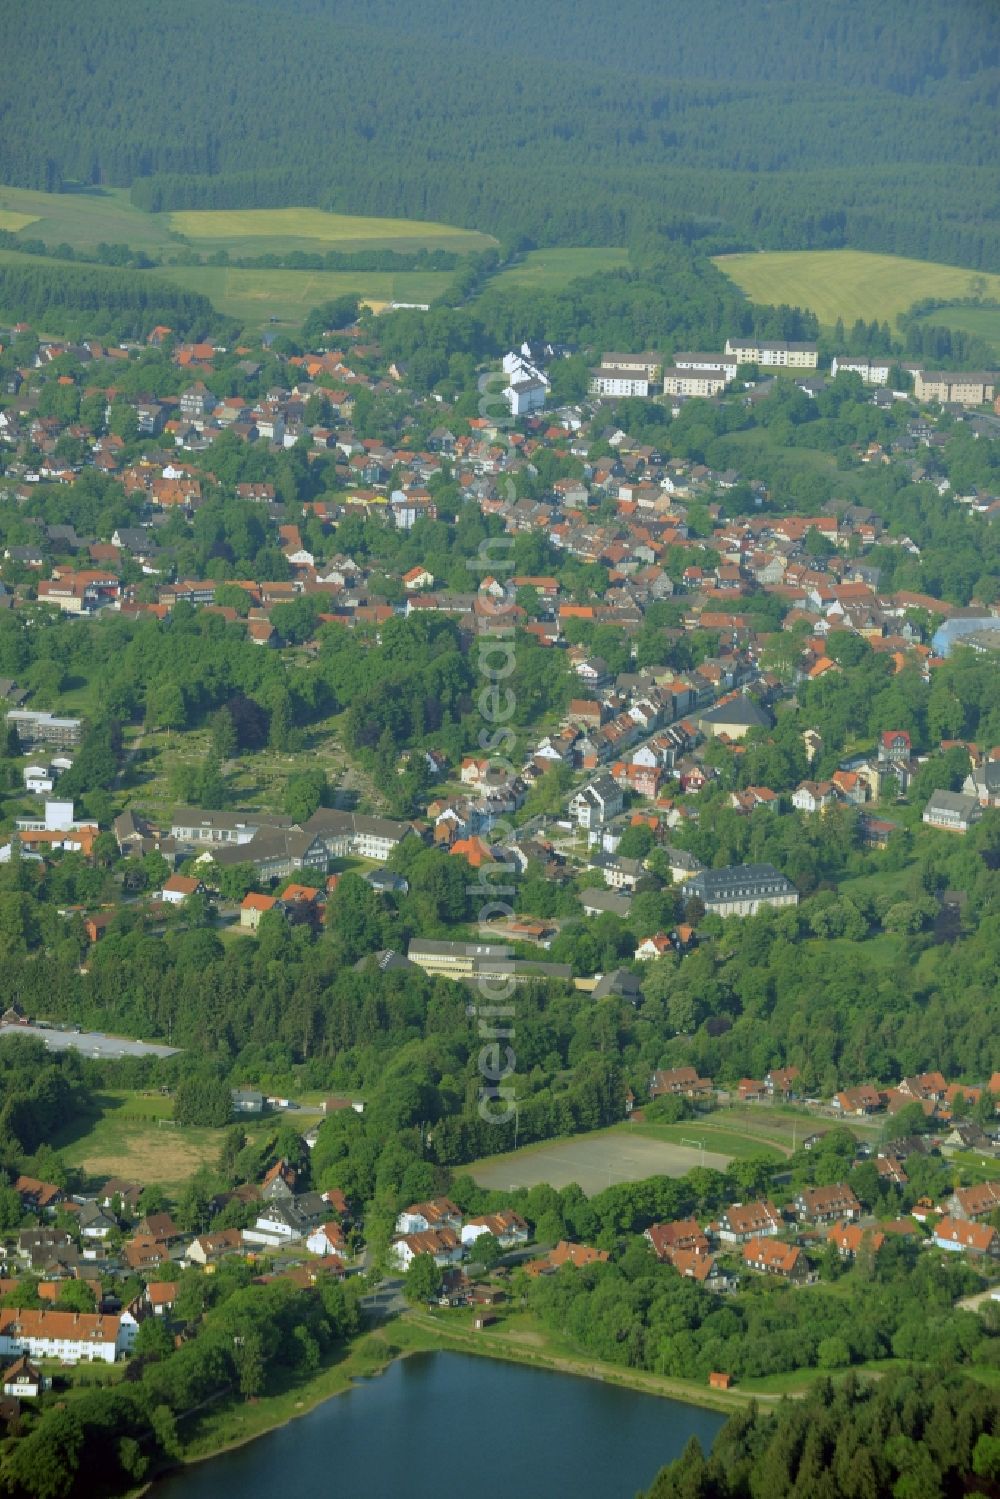 Clausthal-Zellerfeld from above - View of the town of Clausthal-Zellerfeld in the state of Lower Saxony. The mountain and university town is an official spa resort in the county district of Goslar. Two ponds are located in the East of the town which is the location of the Technical University of Clausthal